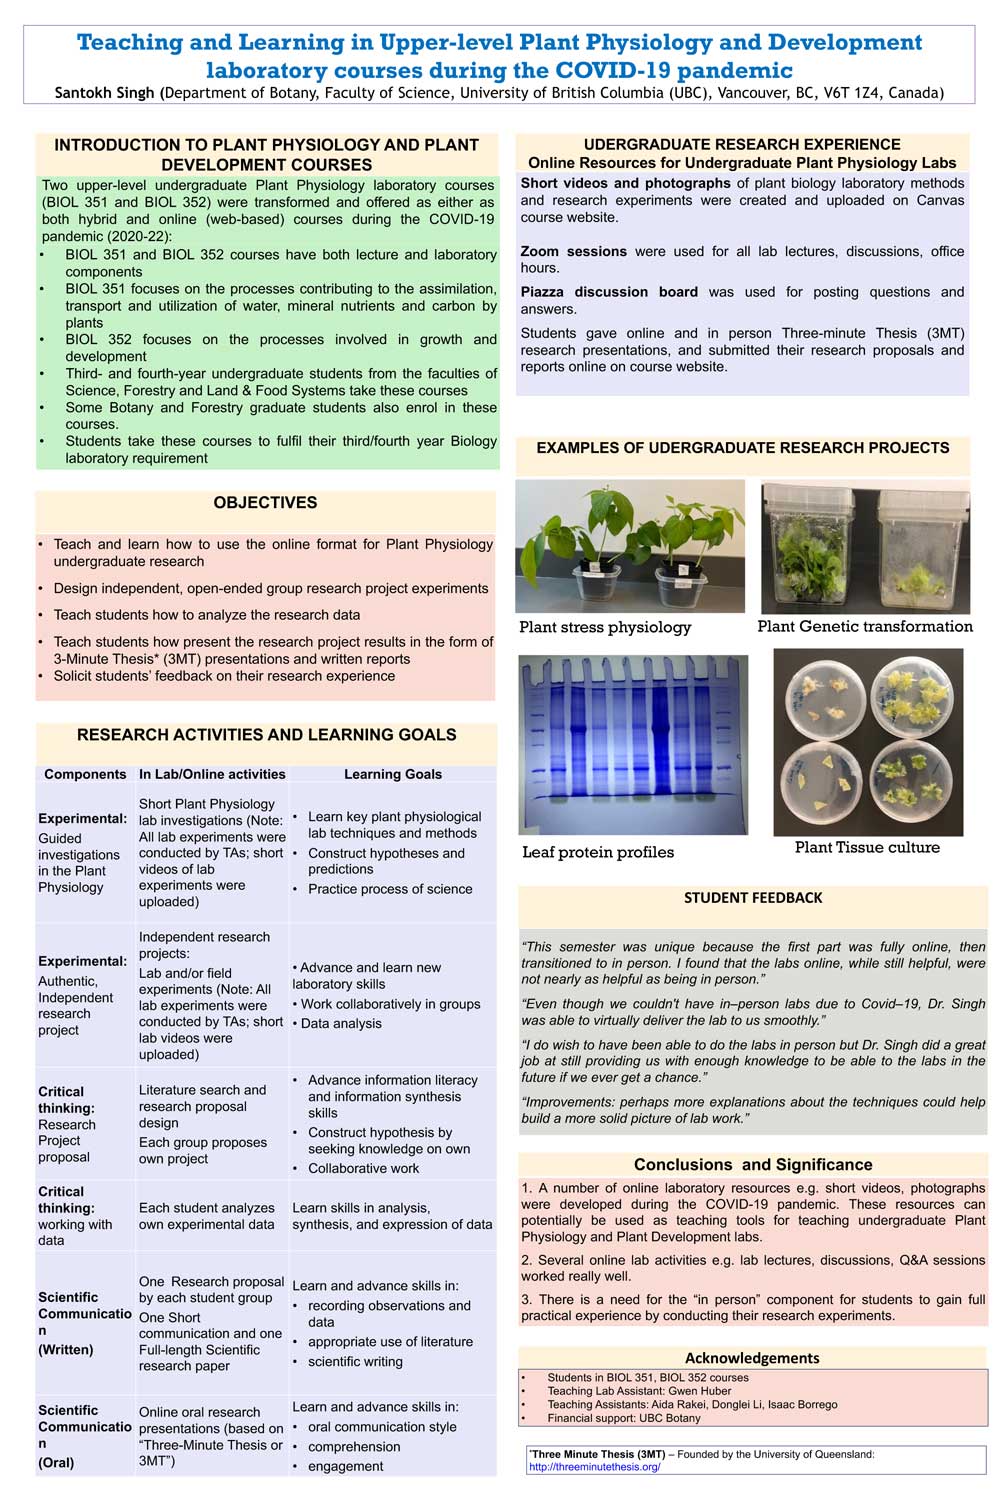 Teaching and Learning in Upper-level Plant Physiology and Development laboratory courses during the COVID-19 Pandemic